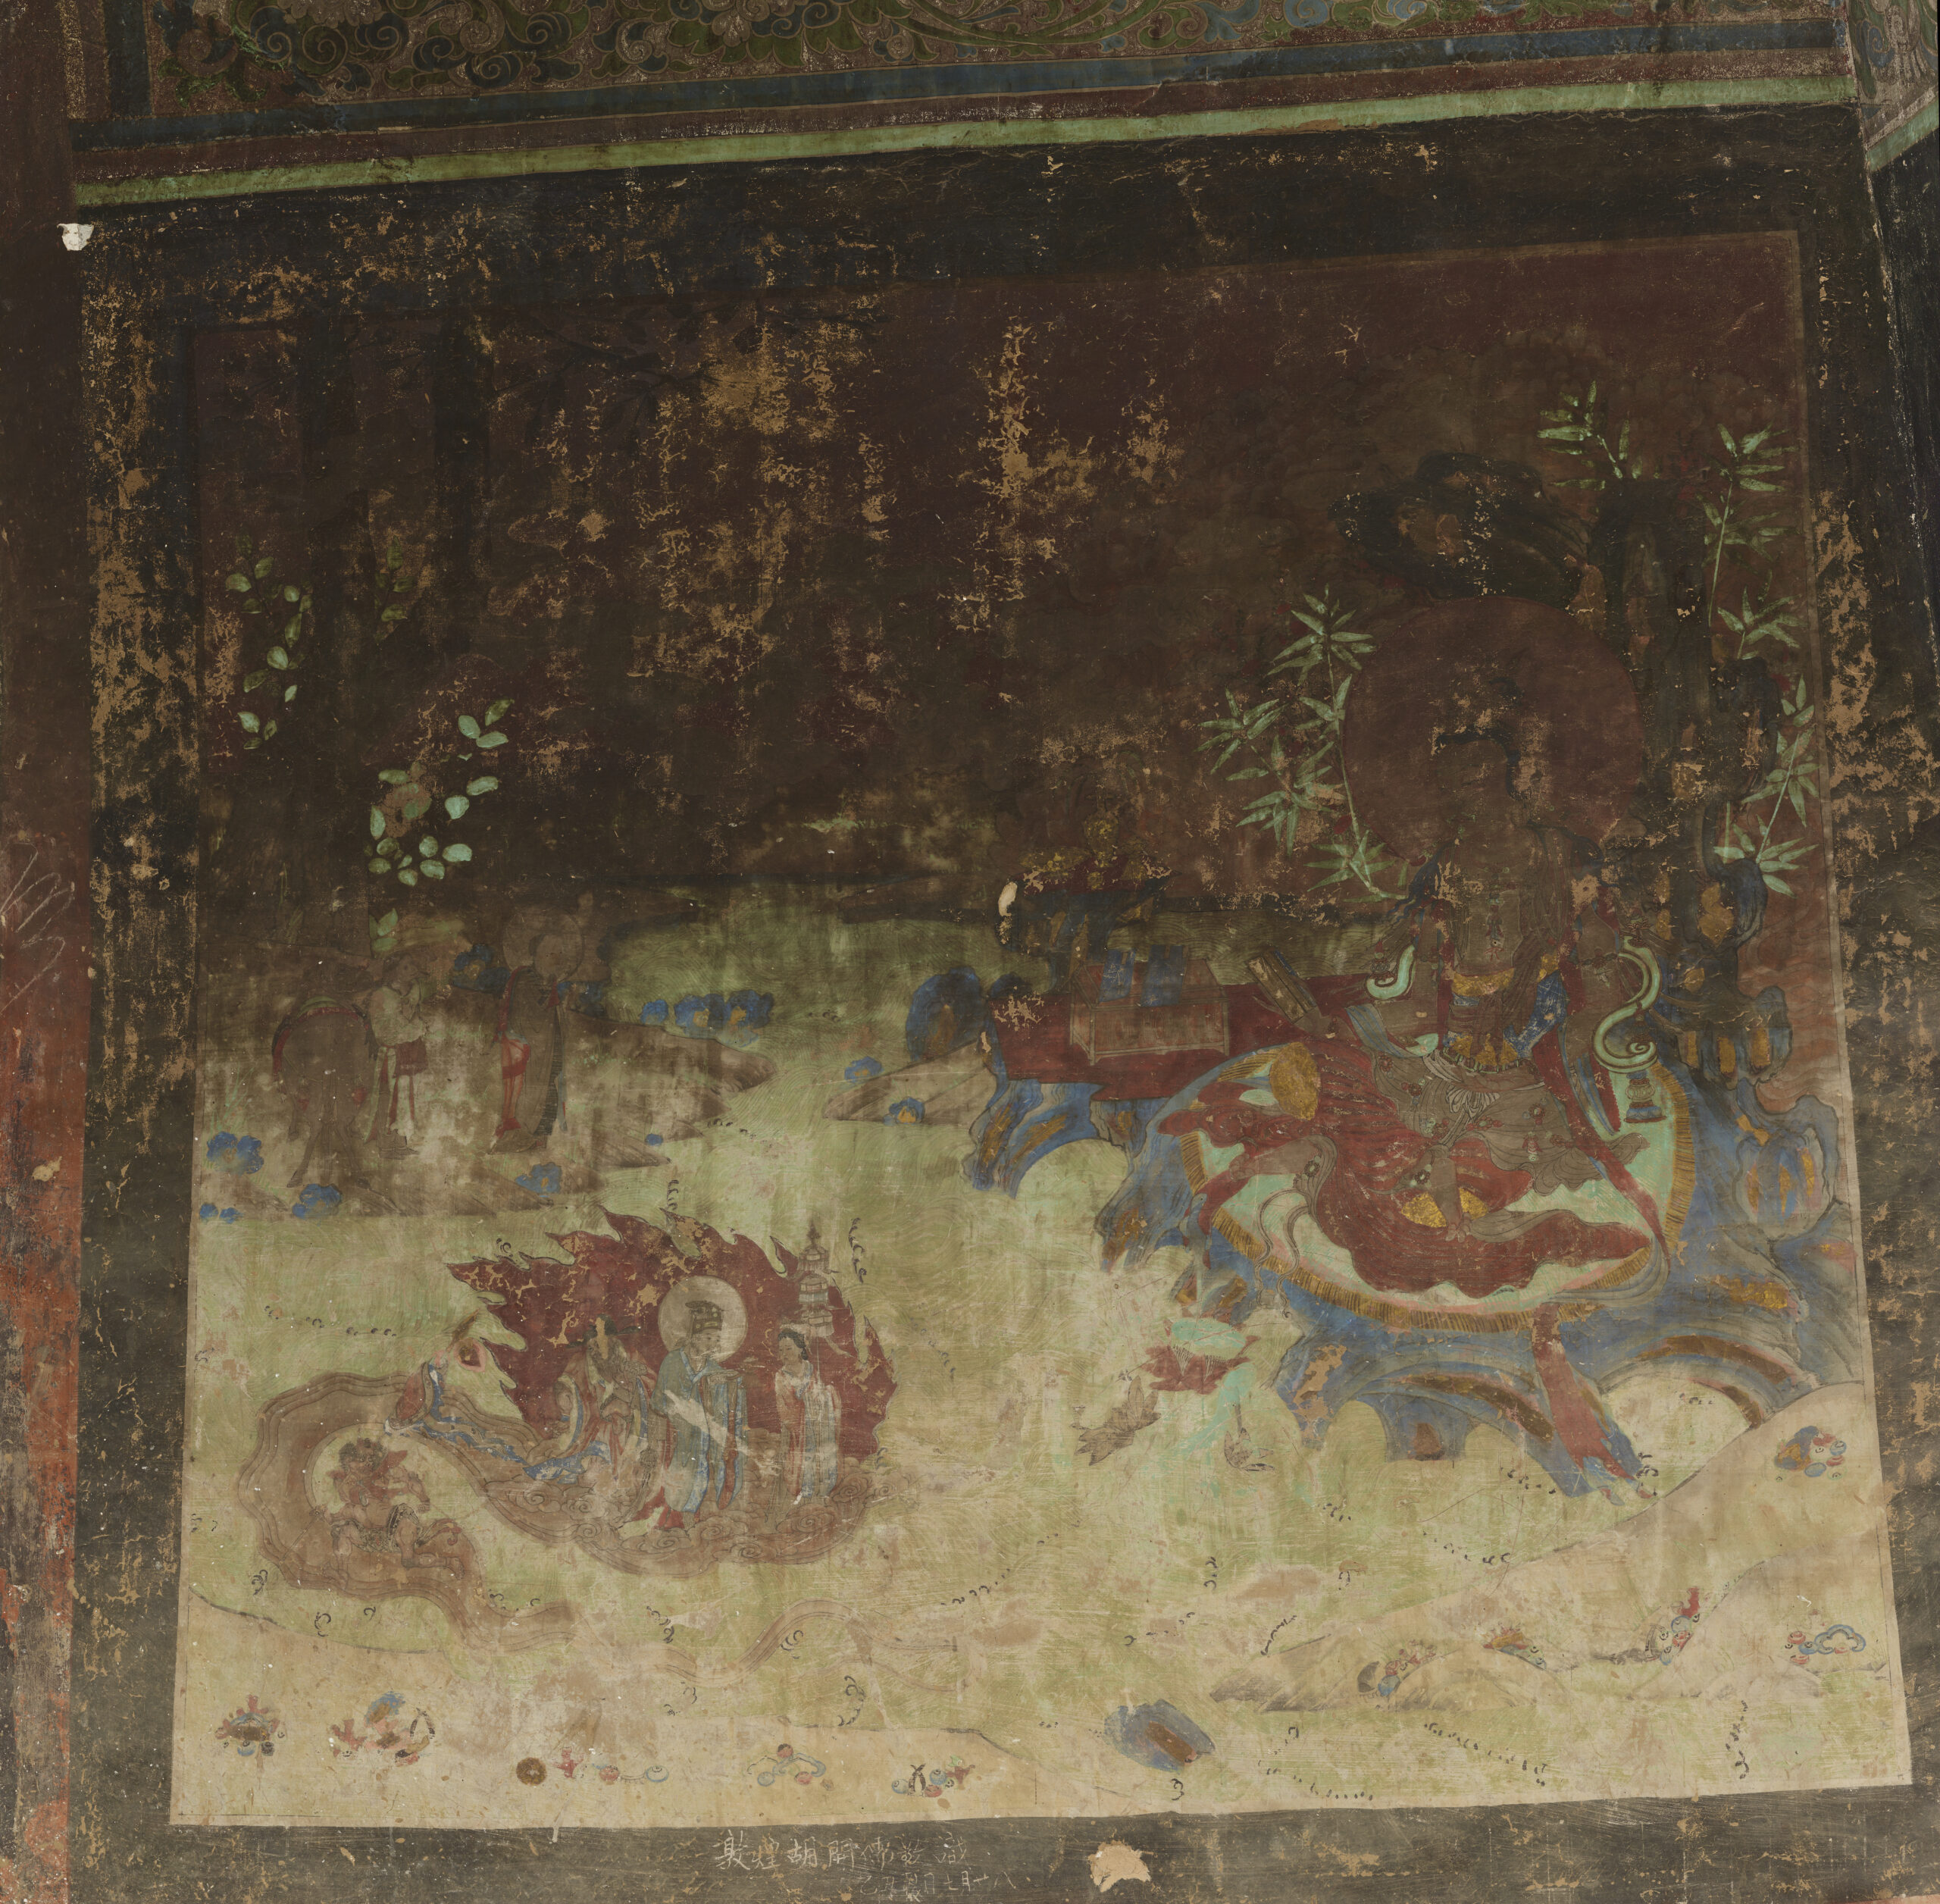 Abraded mural depicting seated figure on right facing smaller figure within fireball on left